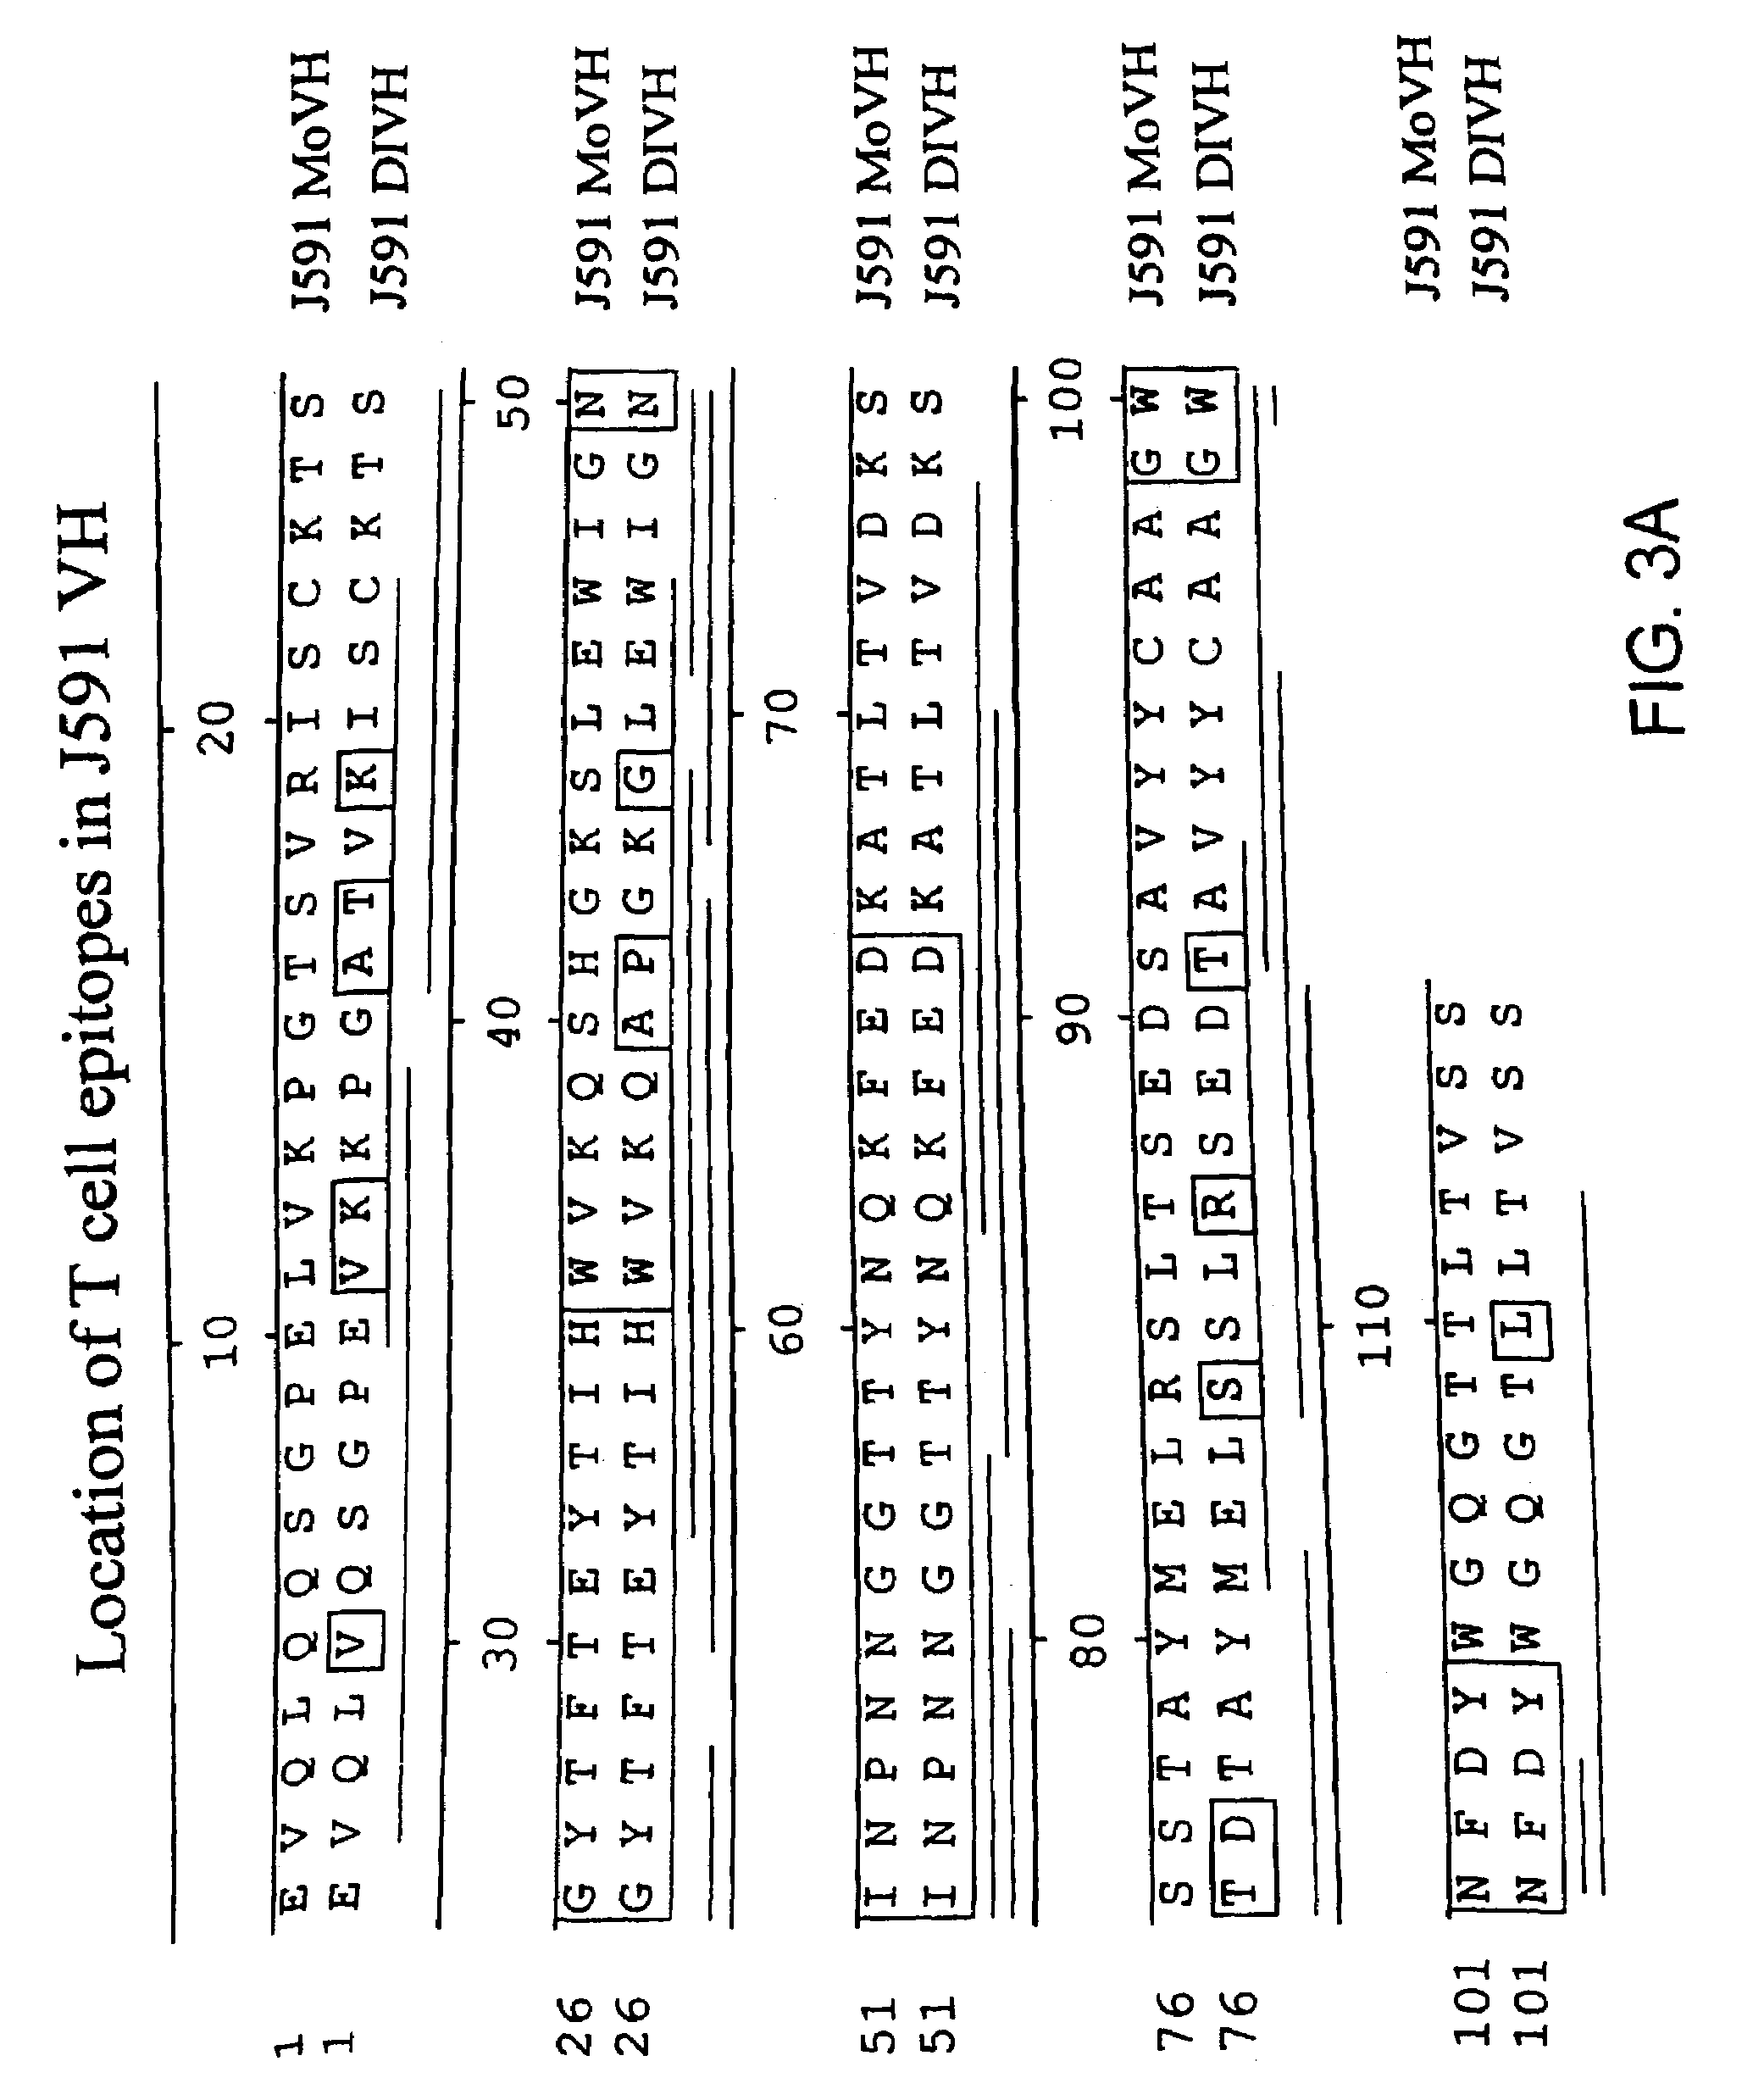 Methods of treating prostate cancer with anti-prostate specific membrane antigen antibodies